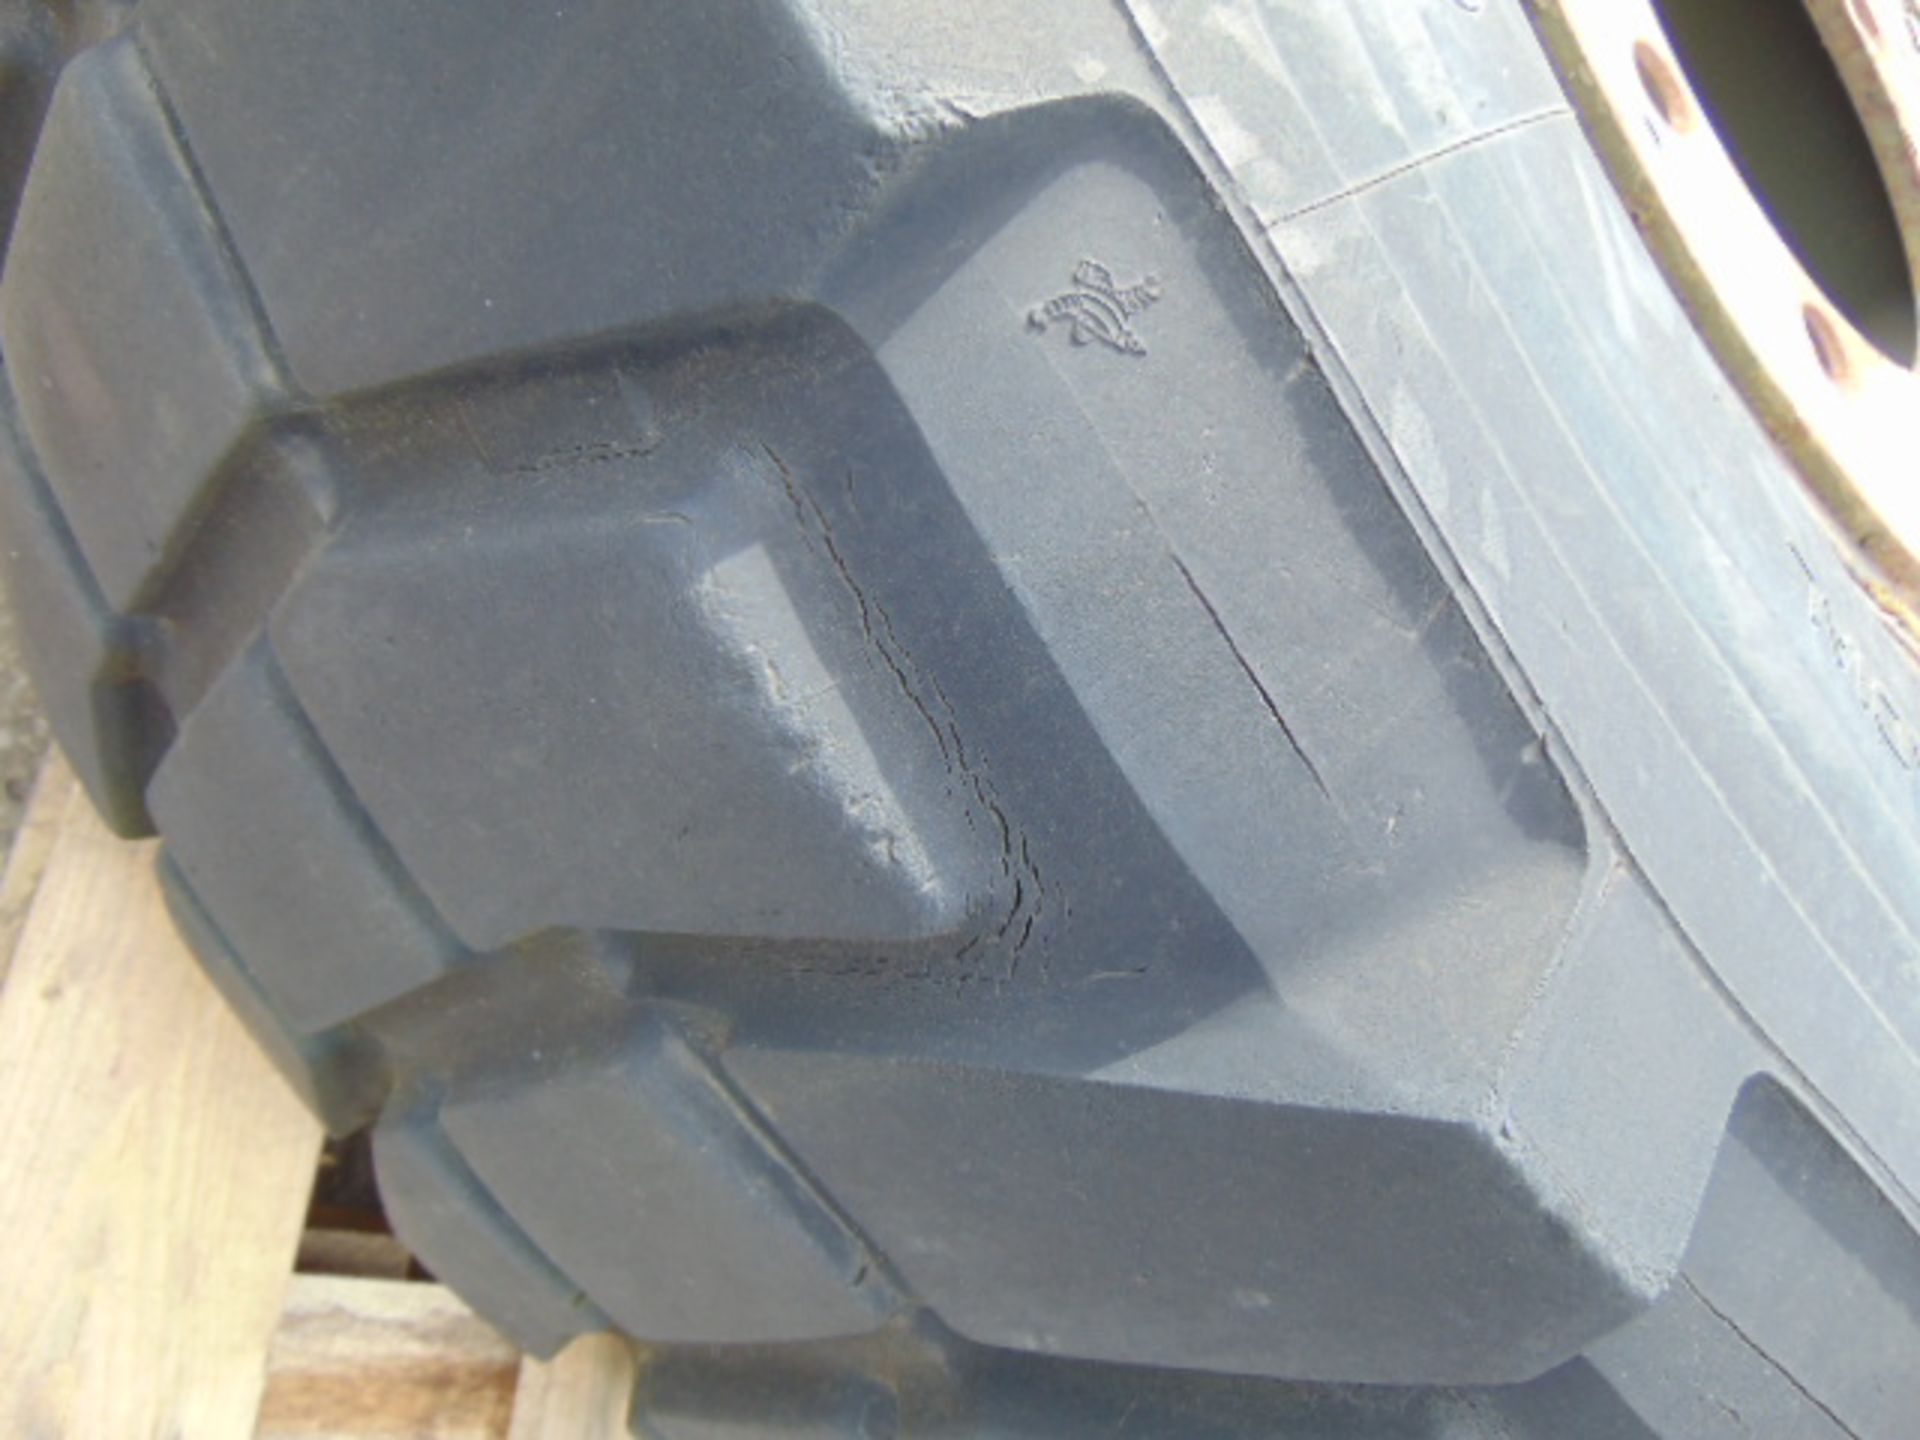 1 x Michelin G-20 Pilote XL 15.5/80 R20 Tyre on 10 stud Rim - Image 3 of 6